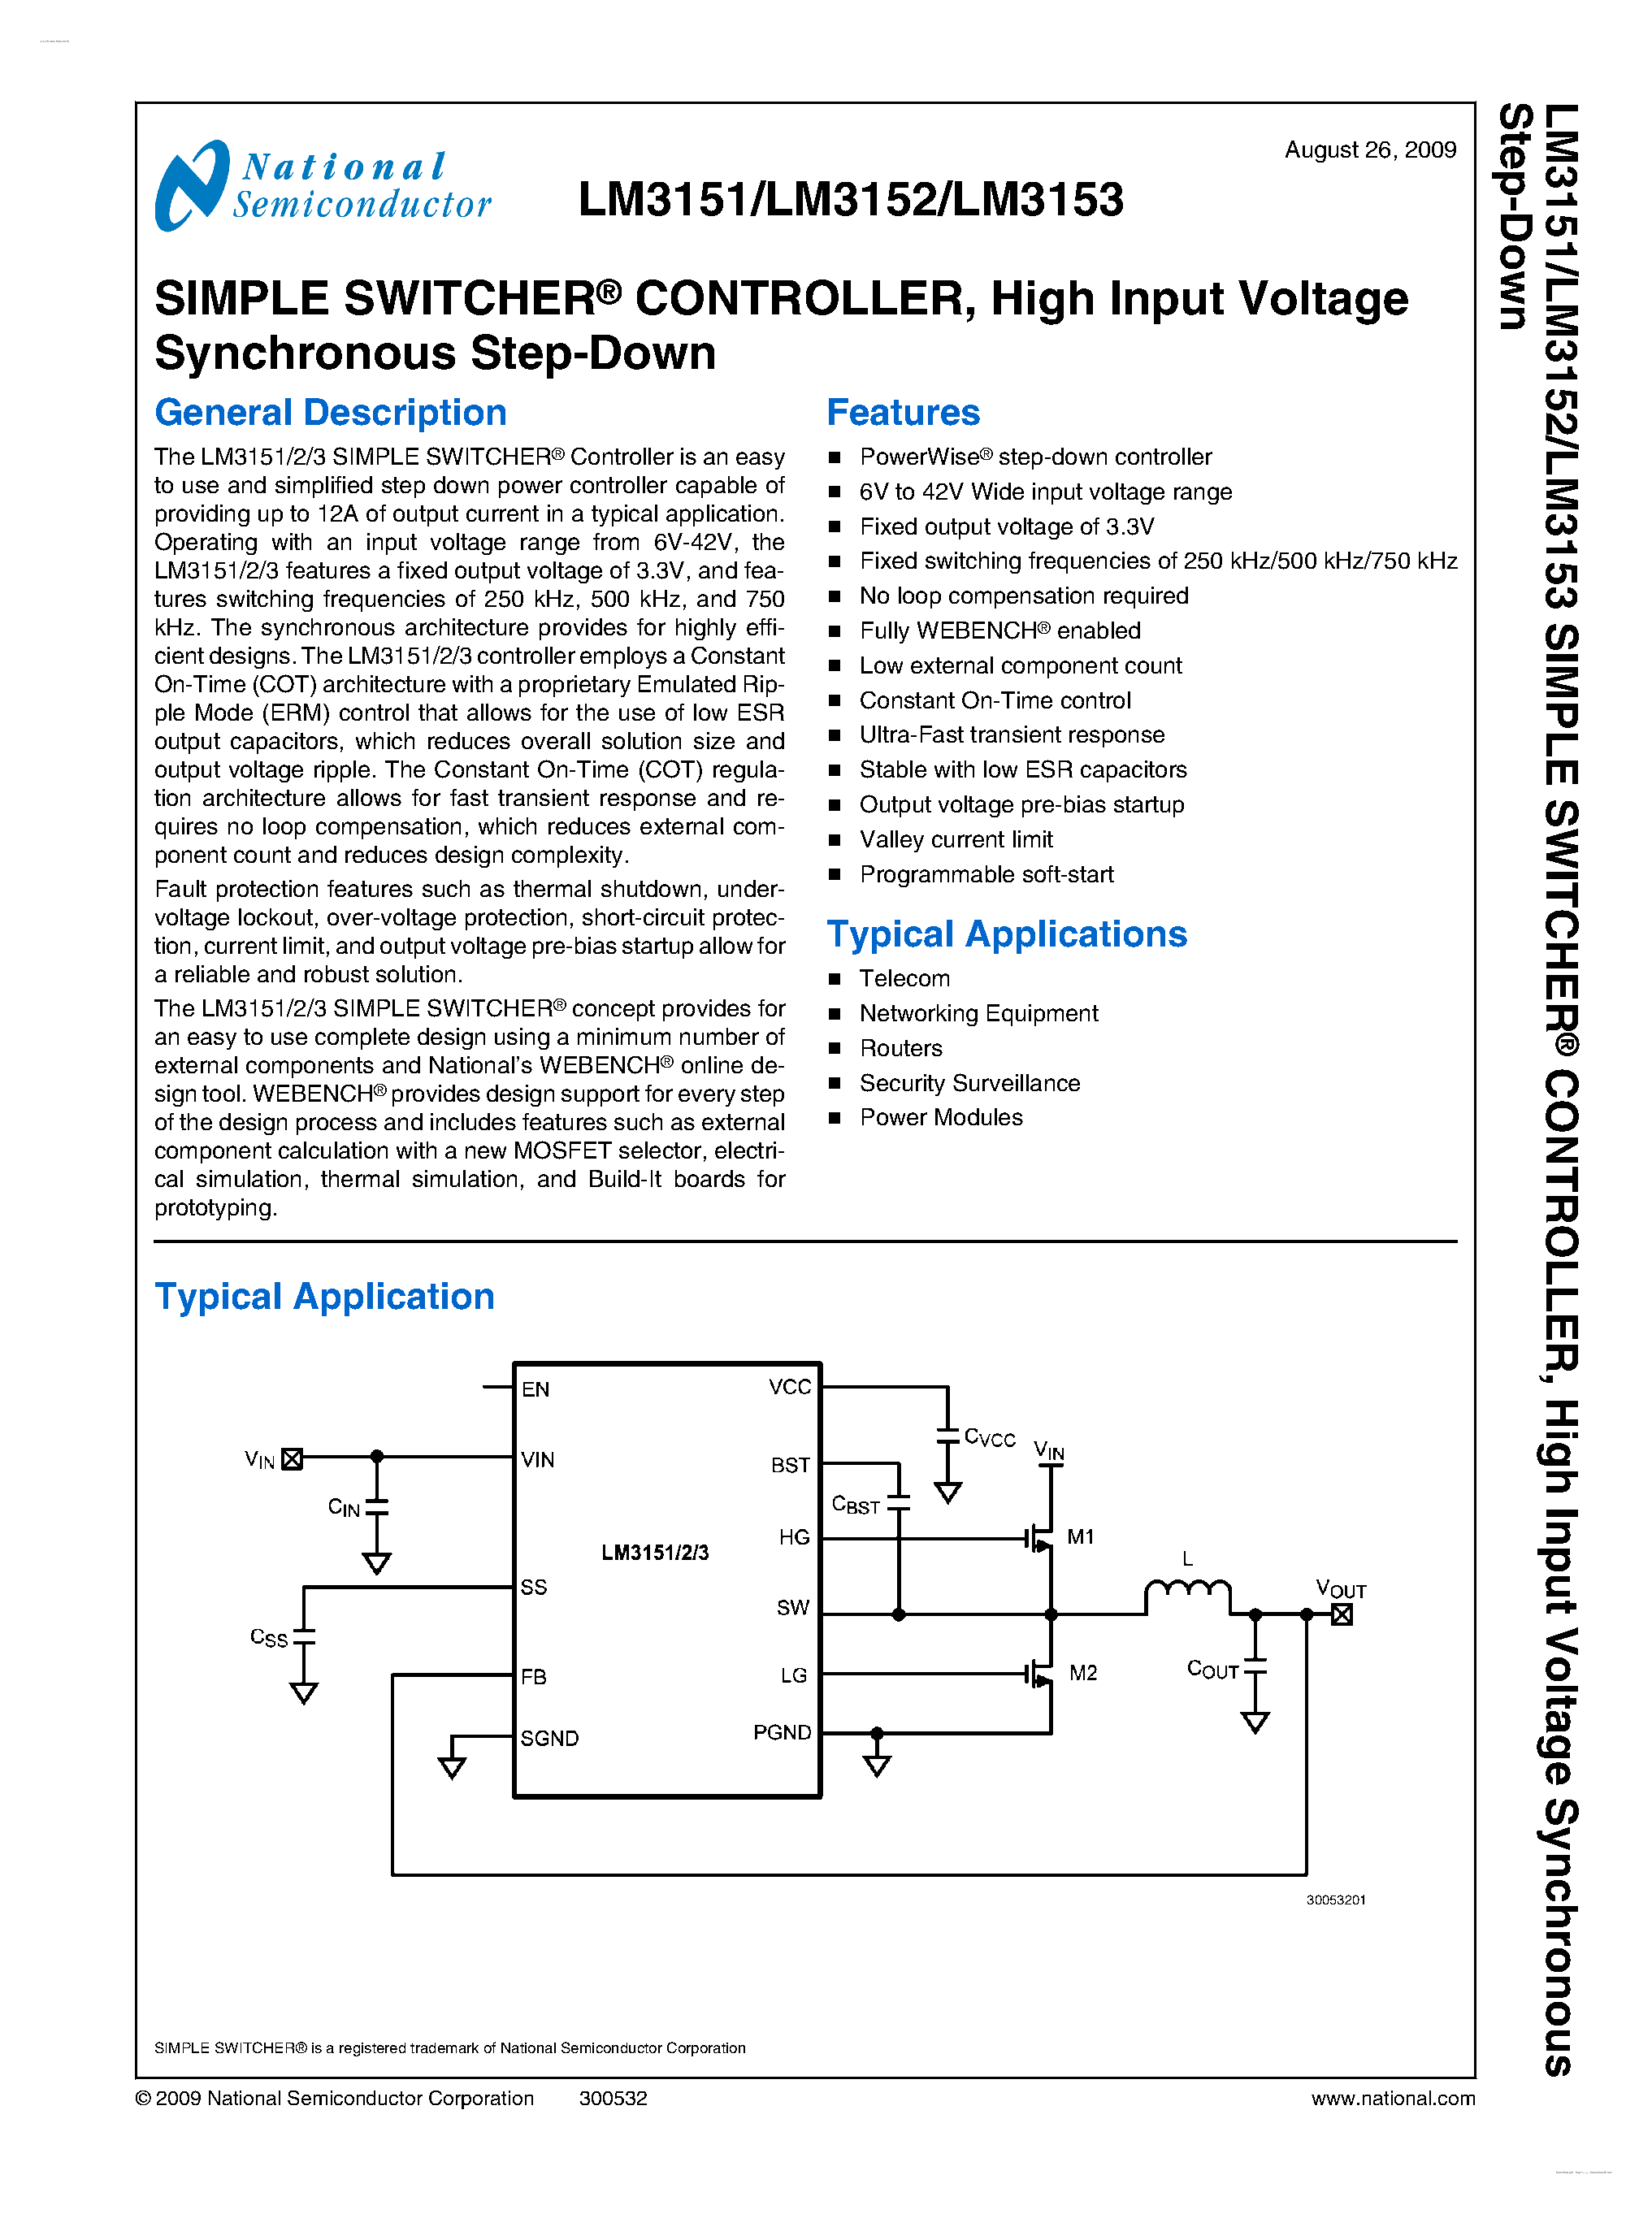 Datasheet LM3151 - (LM3151 - LM3153) SIMPLE SWITCHER CONTROLLER page 1